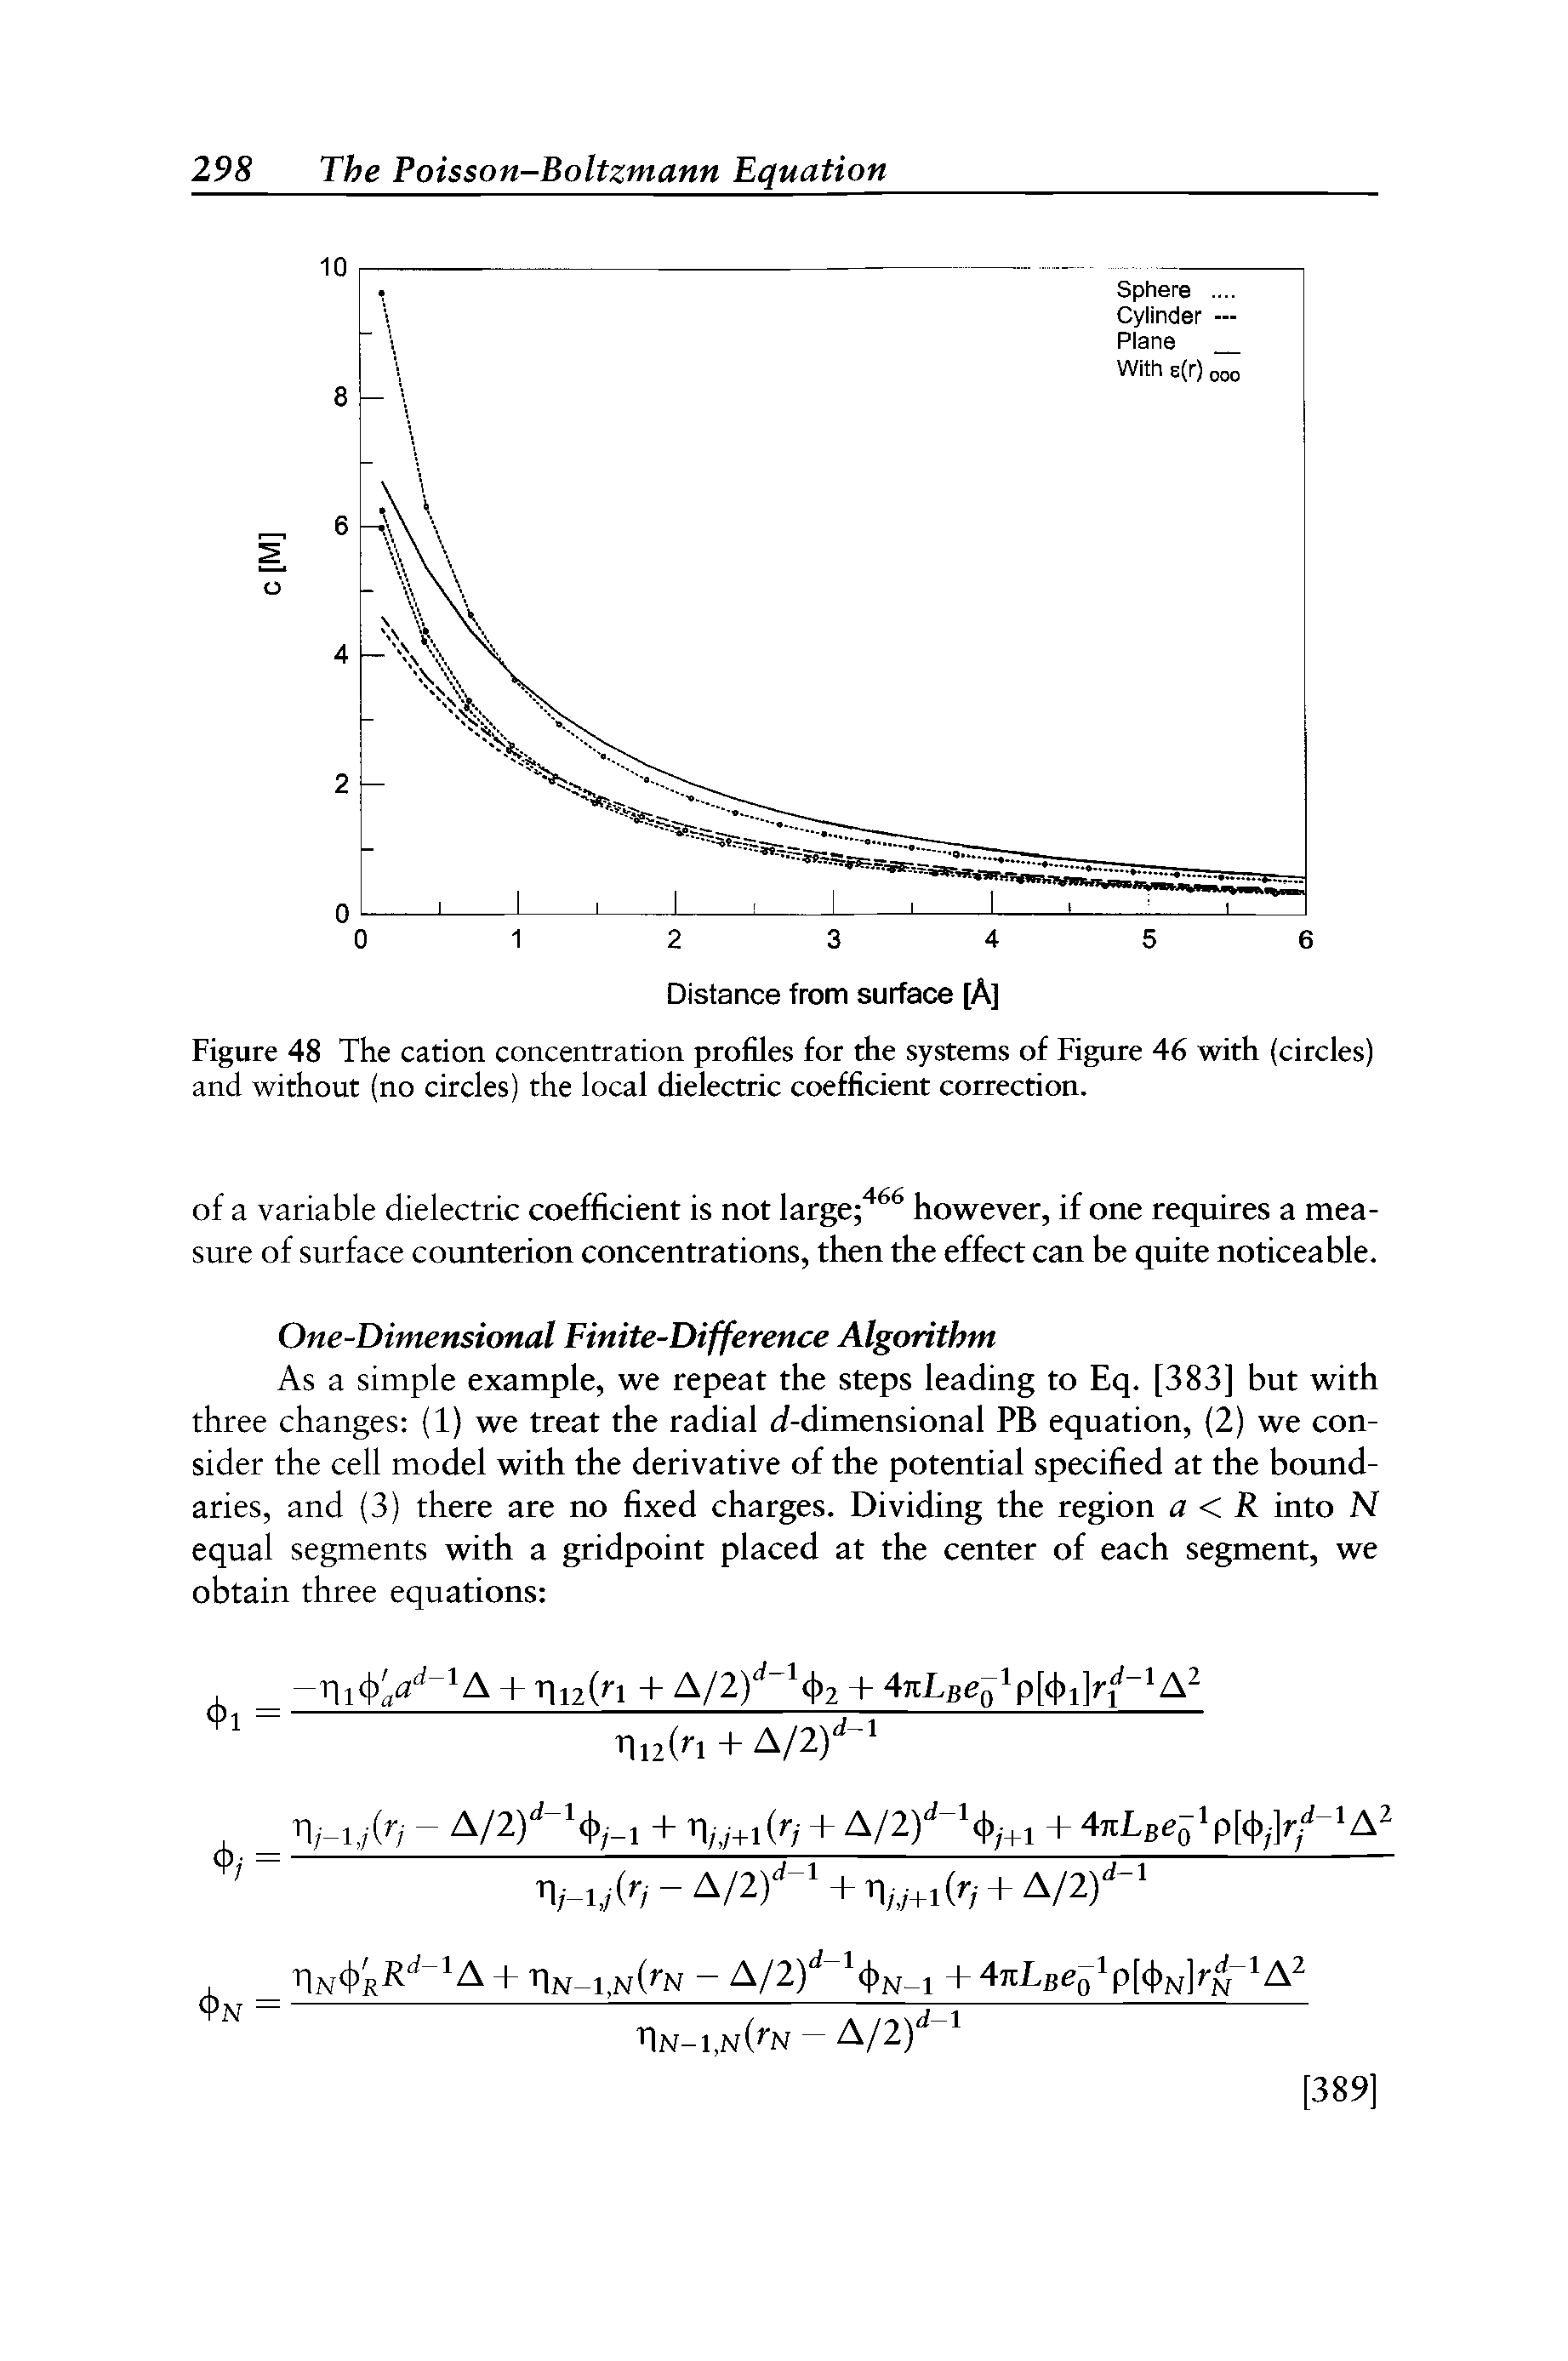 Figure 48 The cation concentration profiles for the systems of Figure 46 with (circles) and without (no circles) the local dielectric coefficient correction.